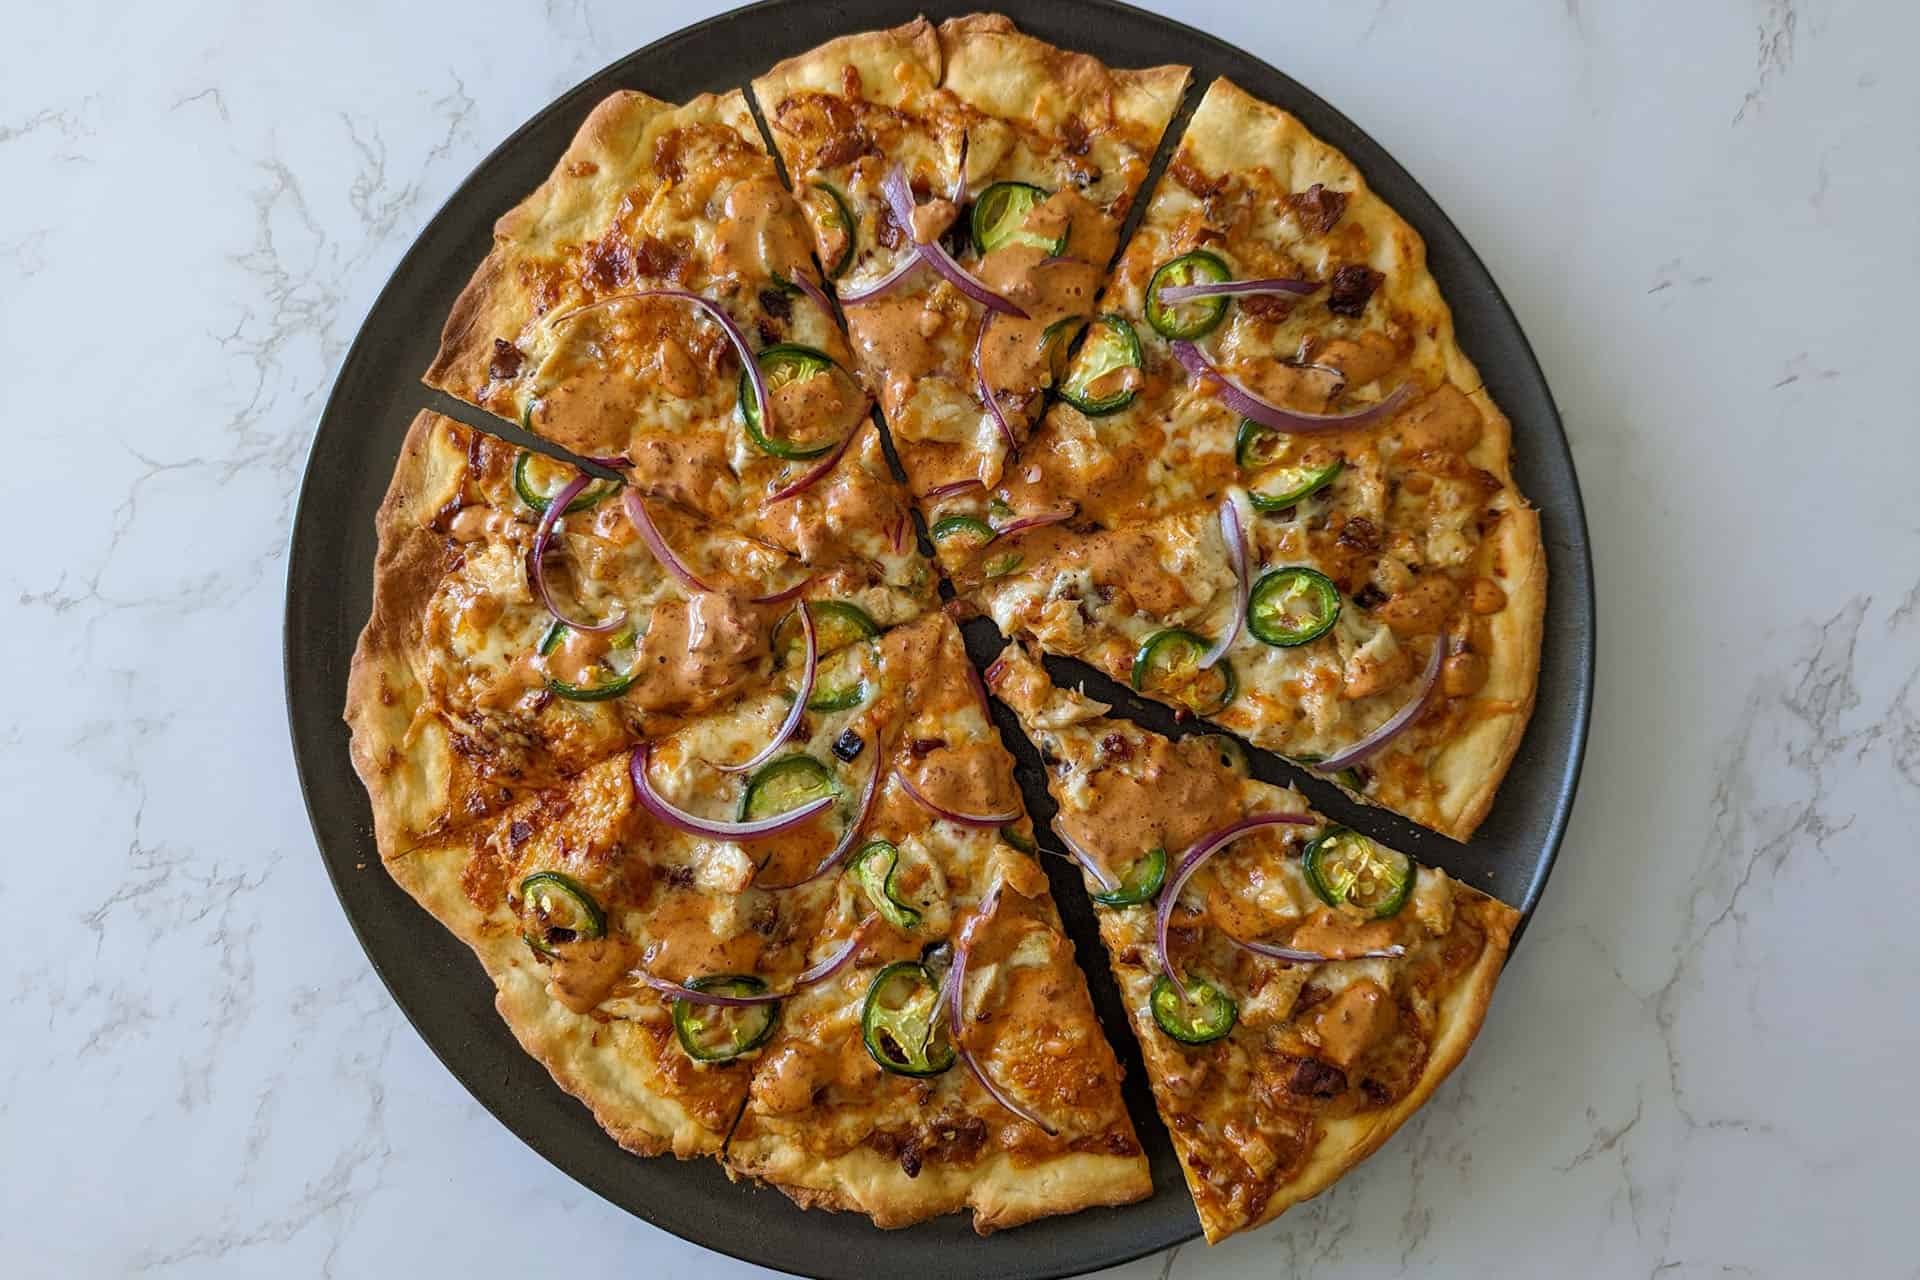 Spicy chicken bacon ranchero pizza topped with jalapenos and red onions